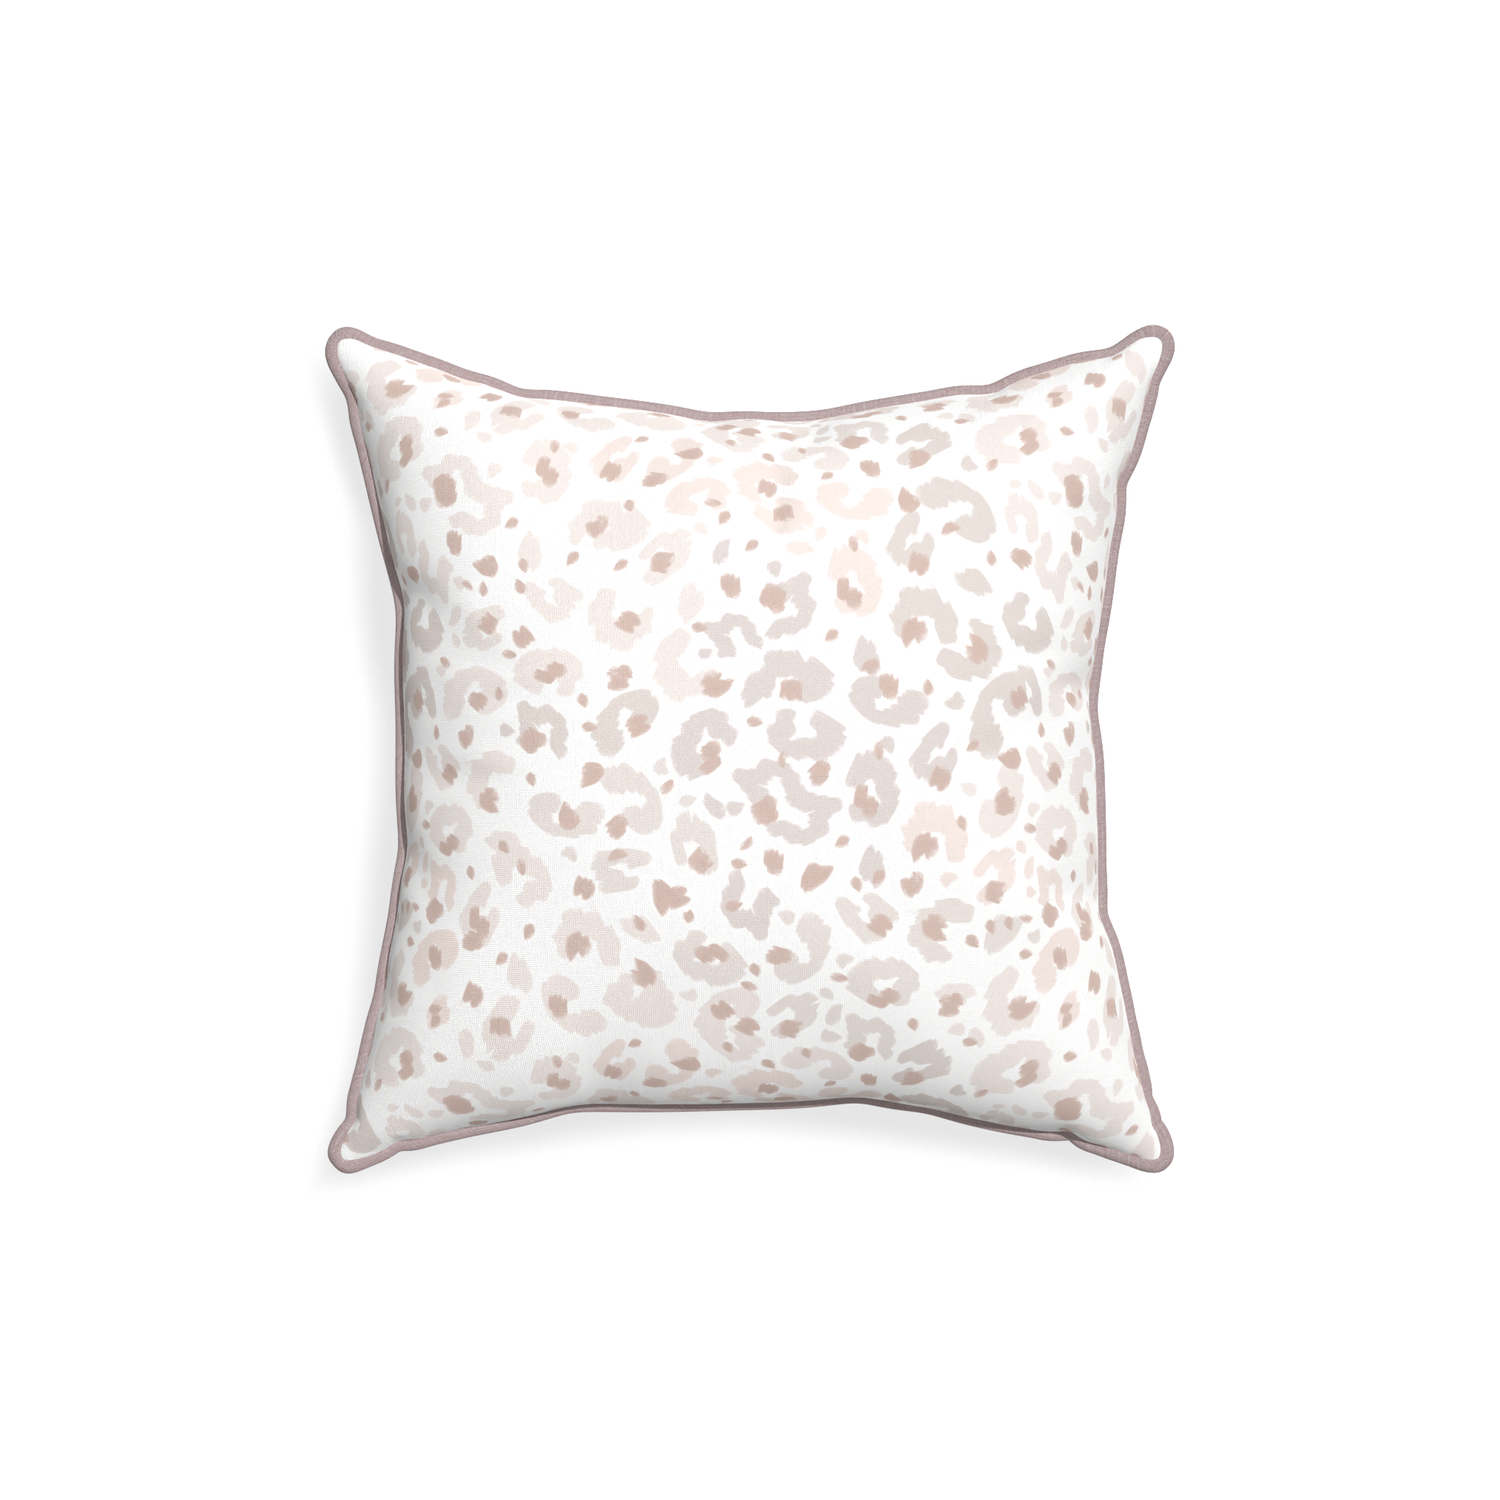 18-square rosie custom beige animal printpillow with orchid piping on white background